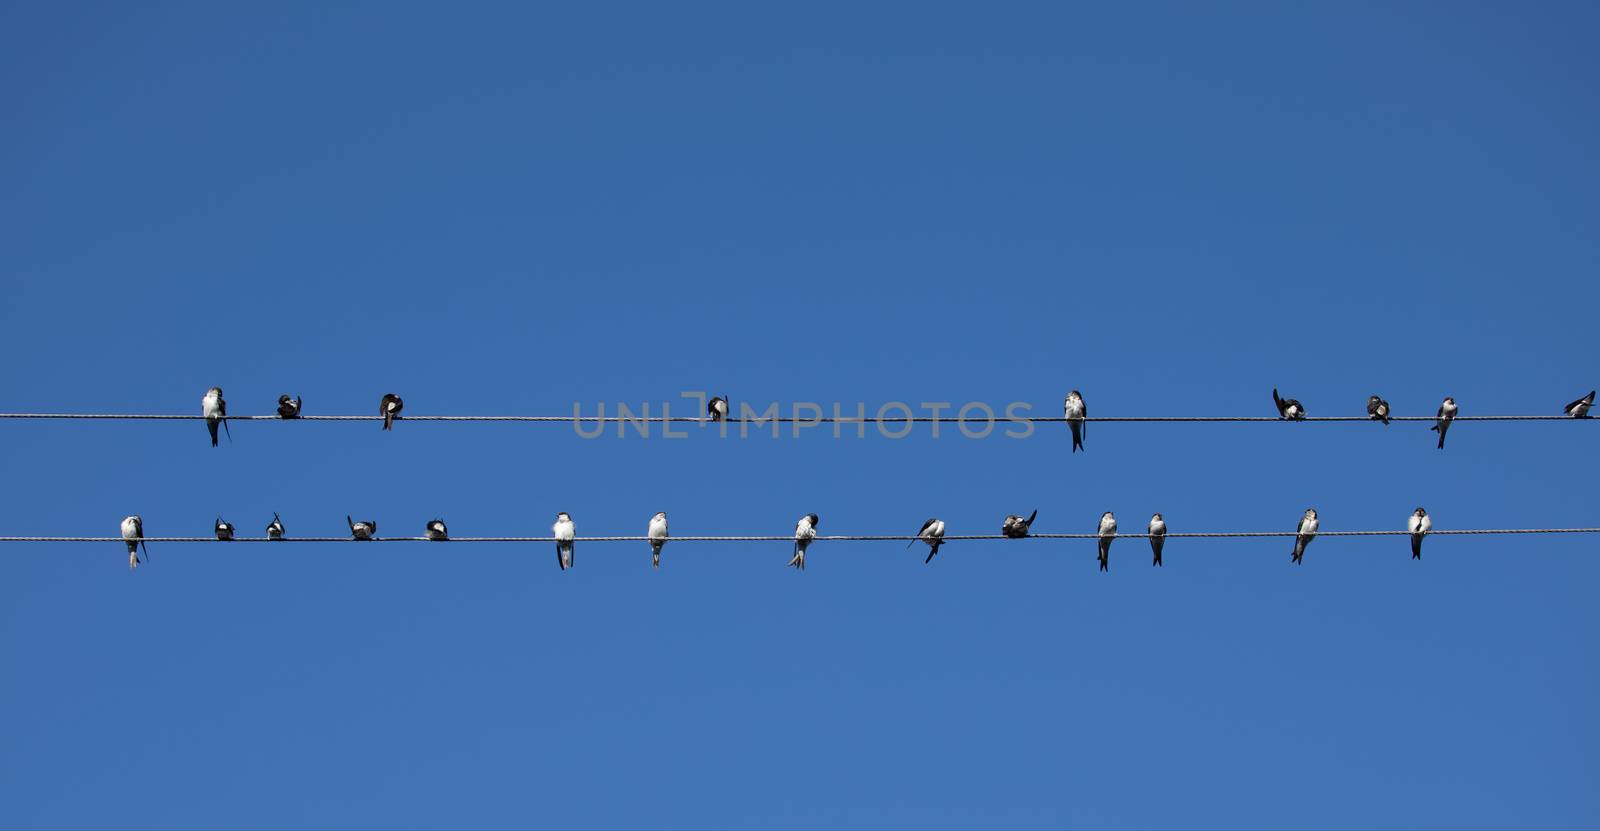 Birds (Swallows) sitting on a wire on clear blue sky background by mkenwoo